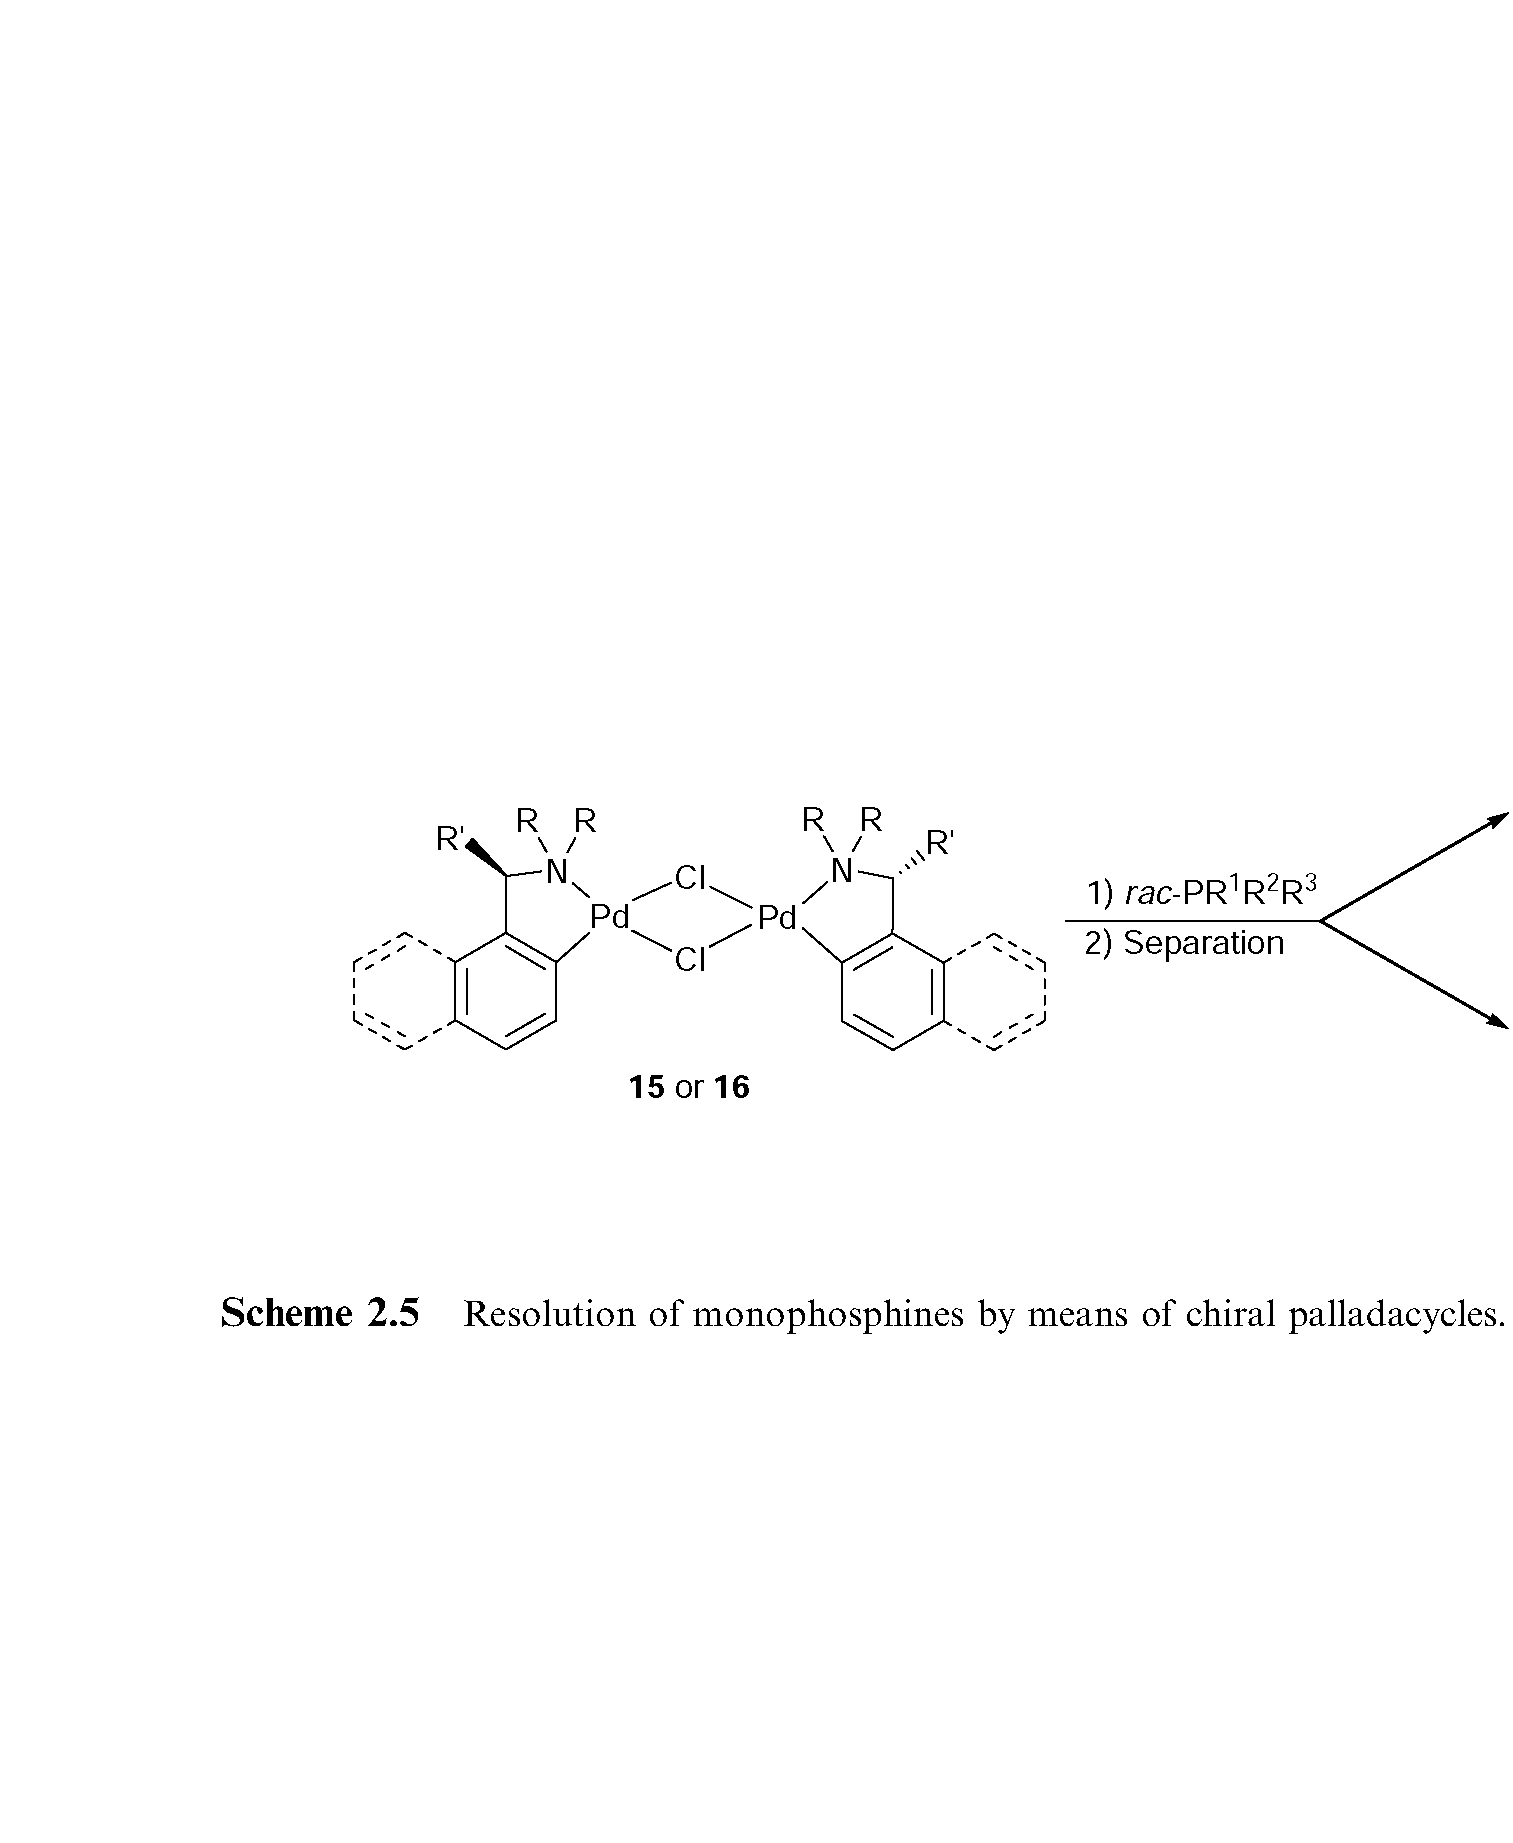 Scheme 2.5 Resolution of monophosphines by means of chiral palladacycles.